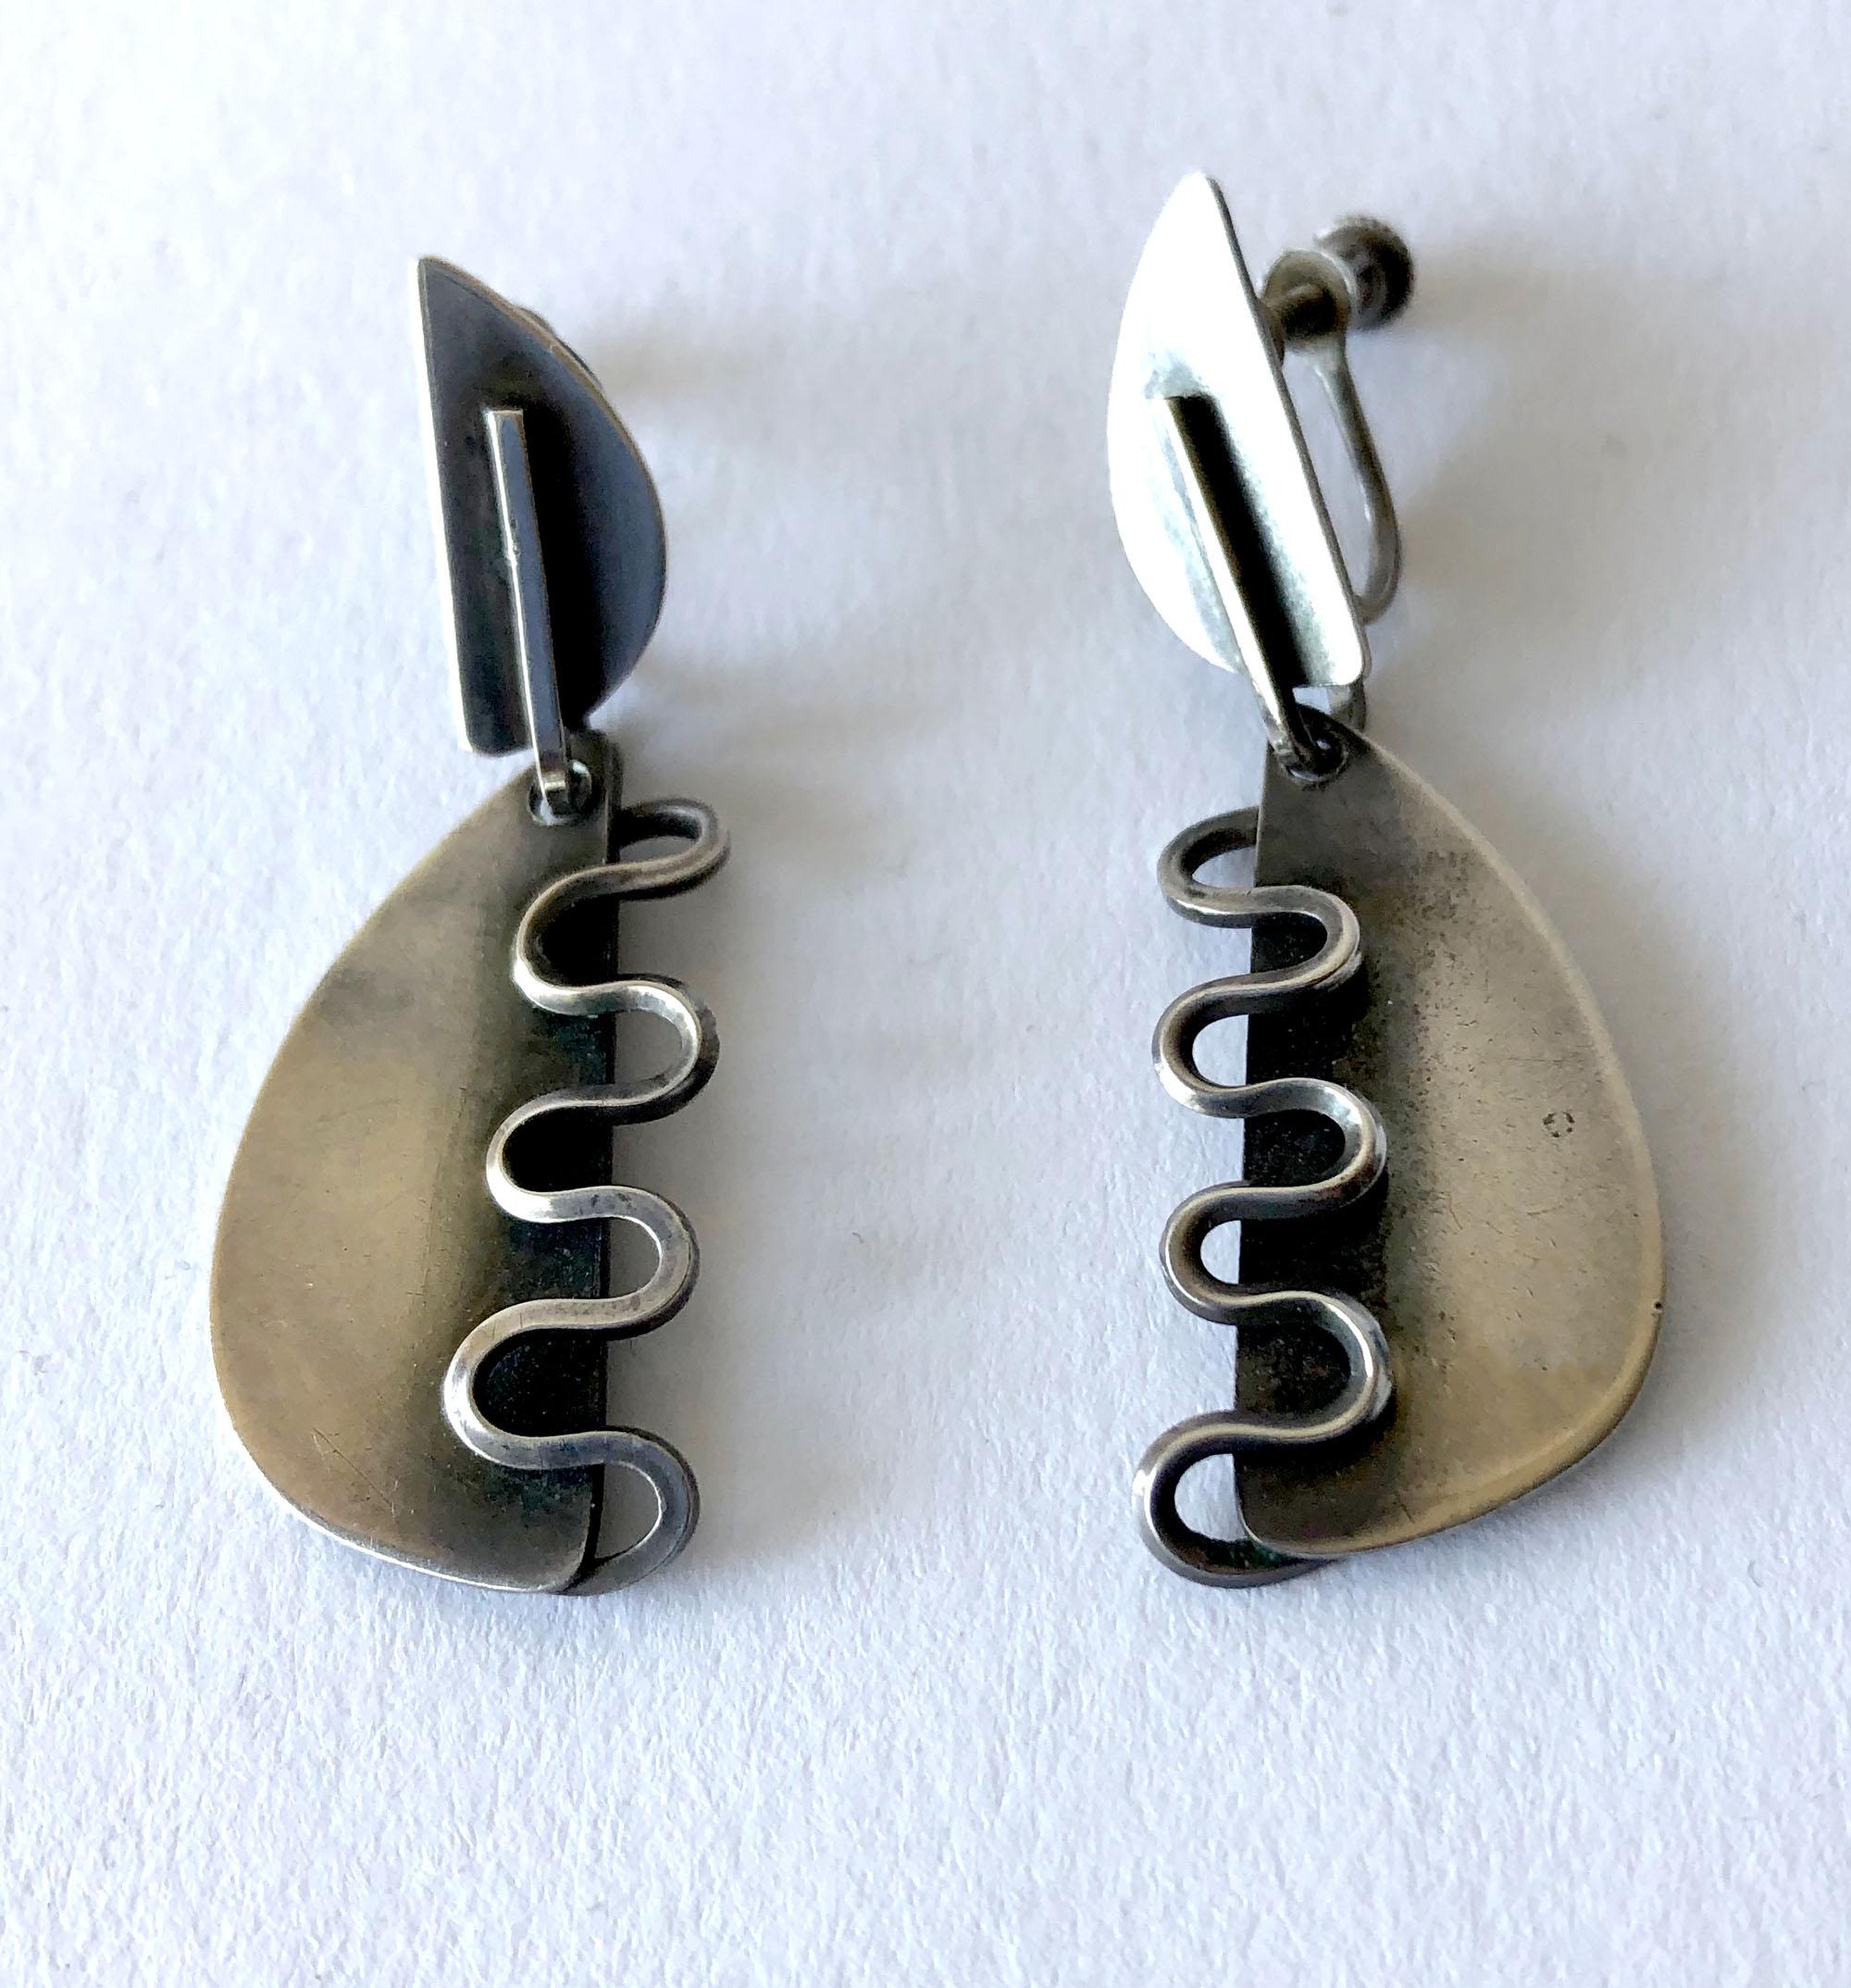 1950's American modernist squiggle earrings possibly created by Paul Lobel or Henry Steig. These earrings are unsigned by the maker.  Earrings measure 1 5/8